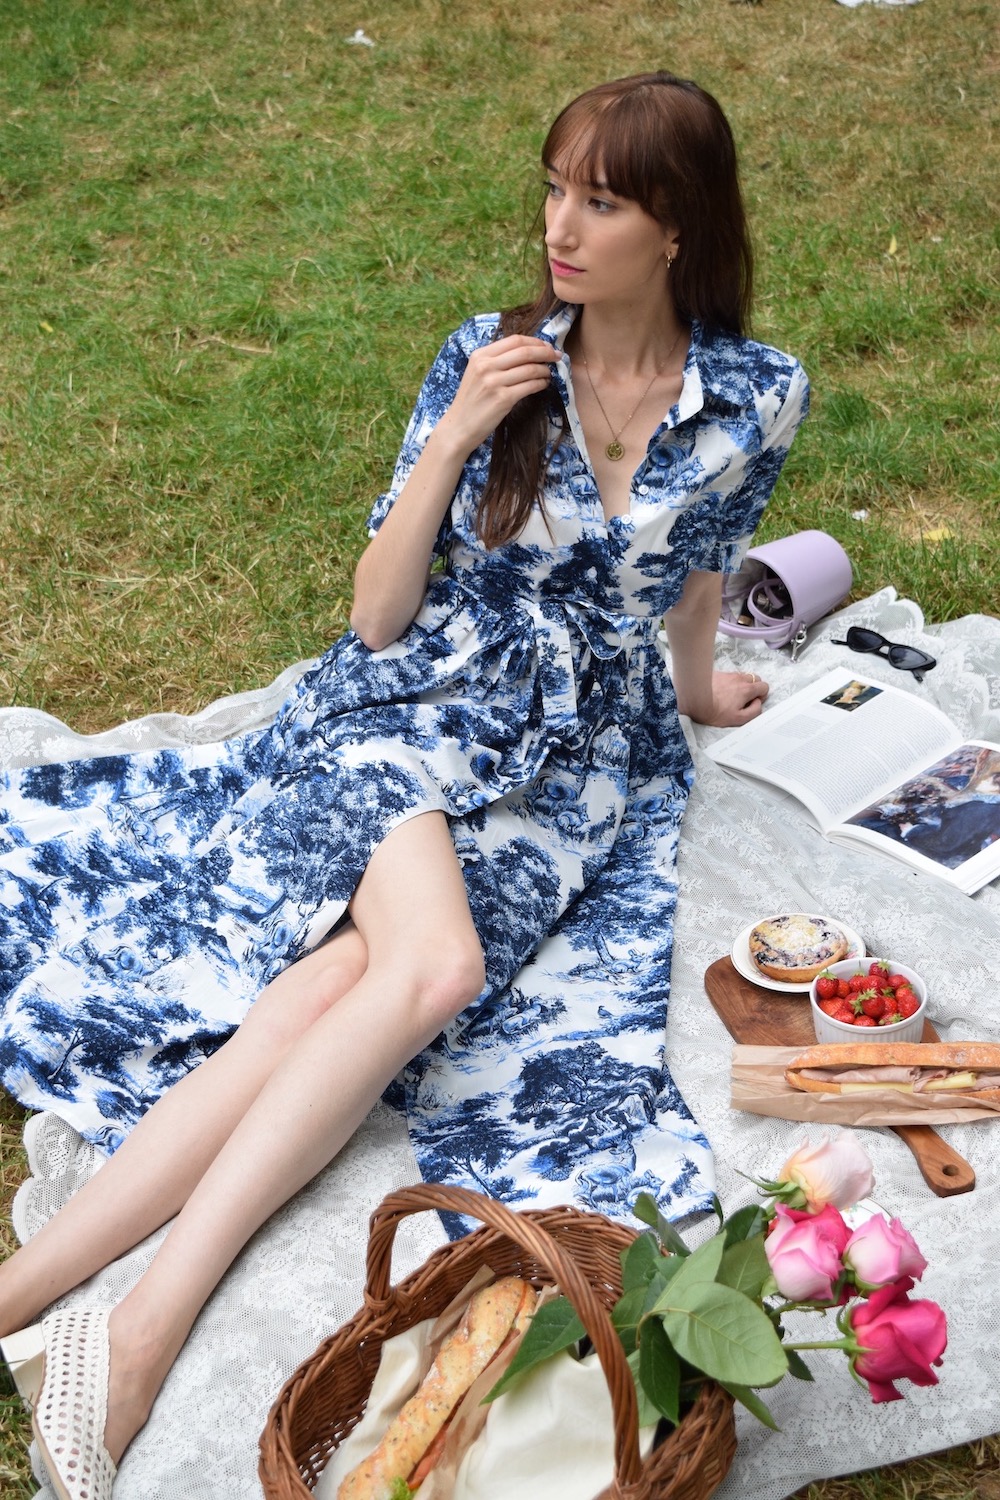 Picnic in Parc Monceau wearing the Andiata Sinne dress